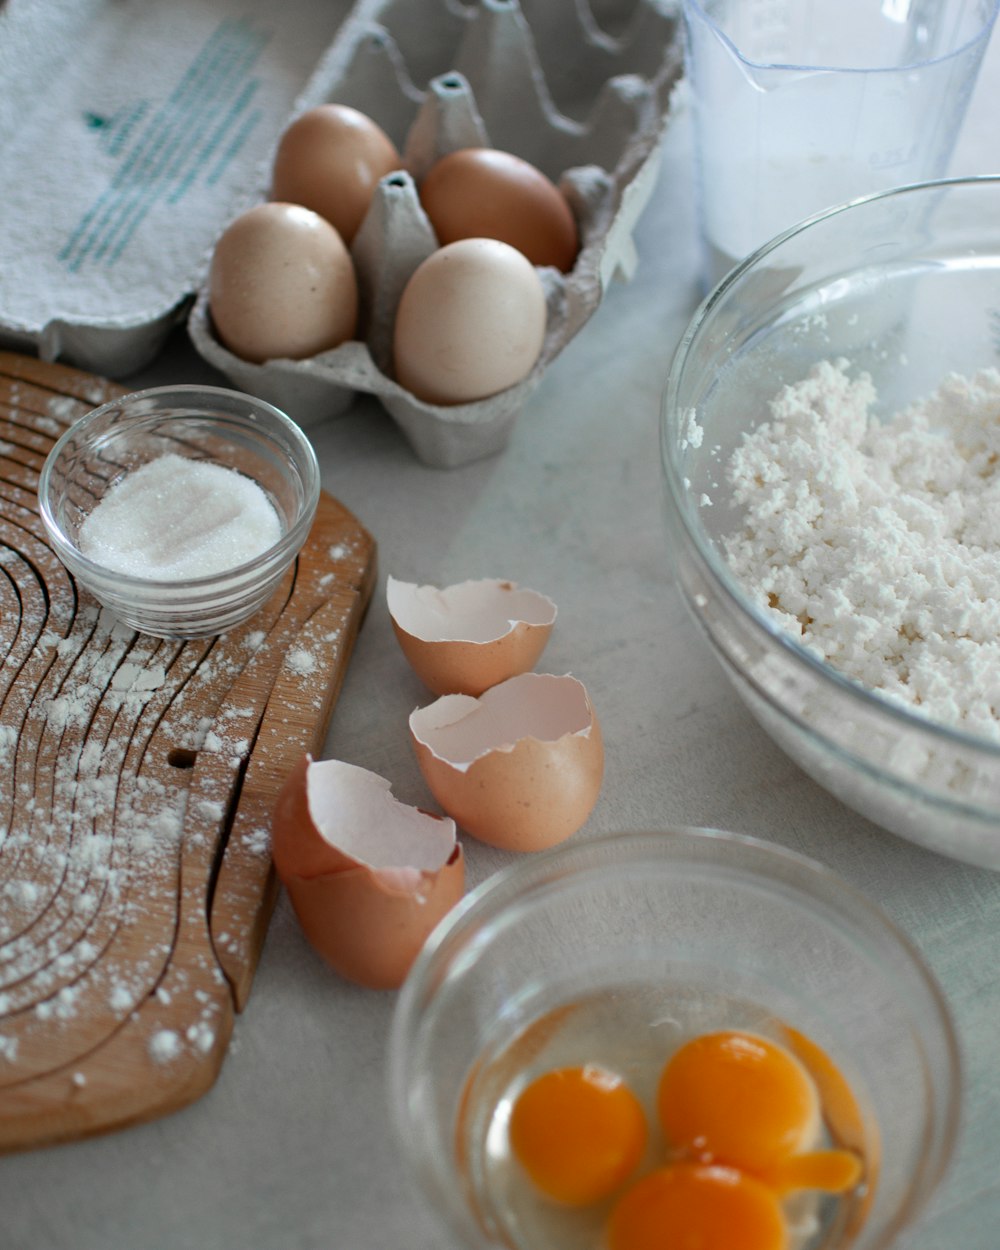 a table with eggs, flour, and other ingredients